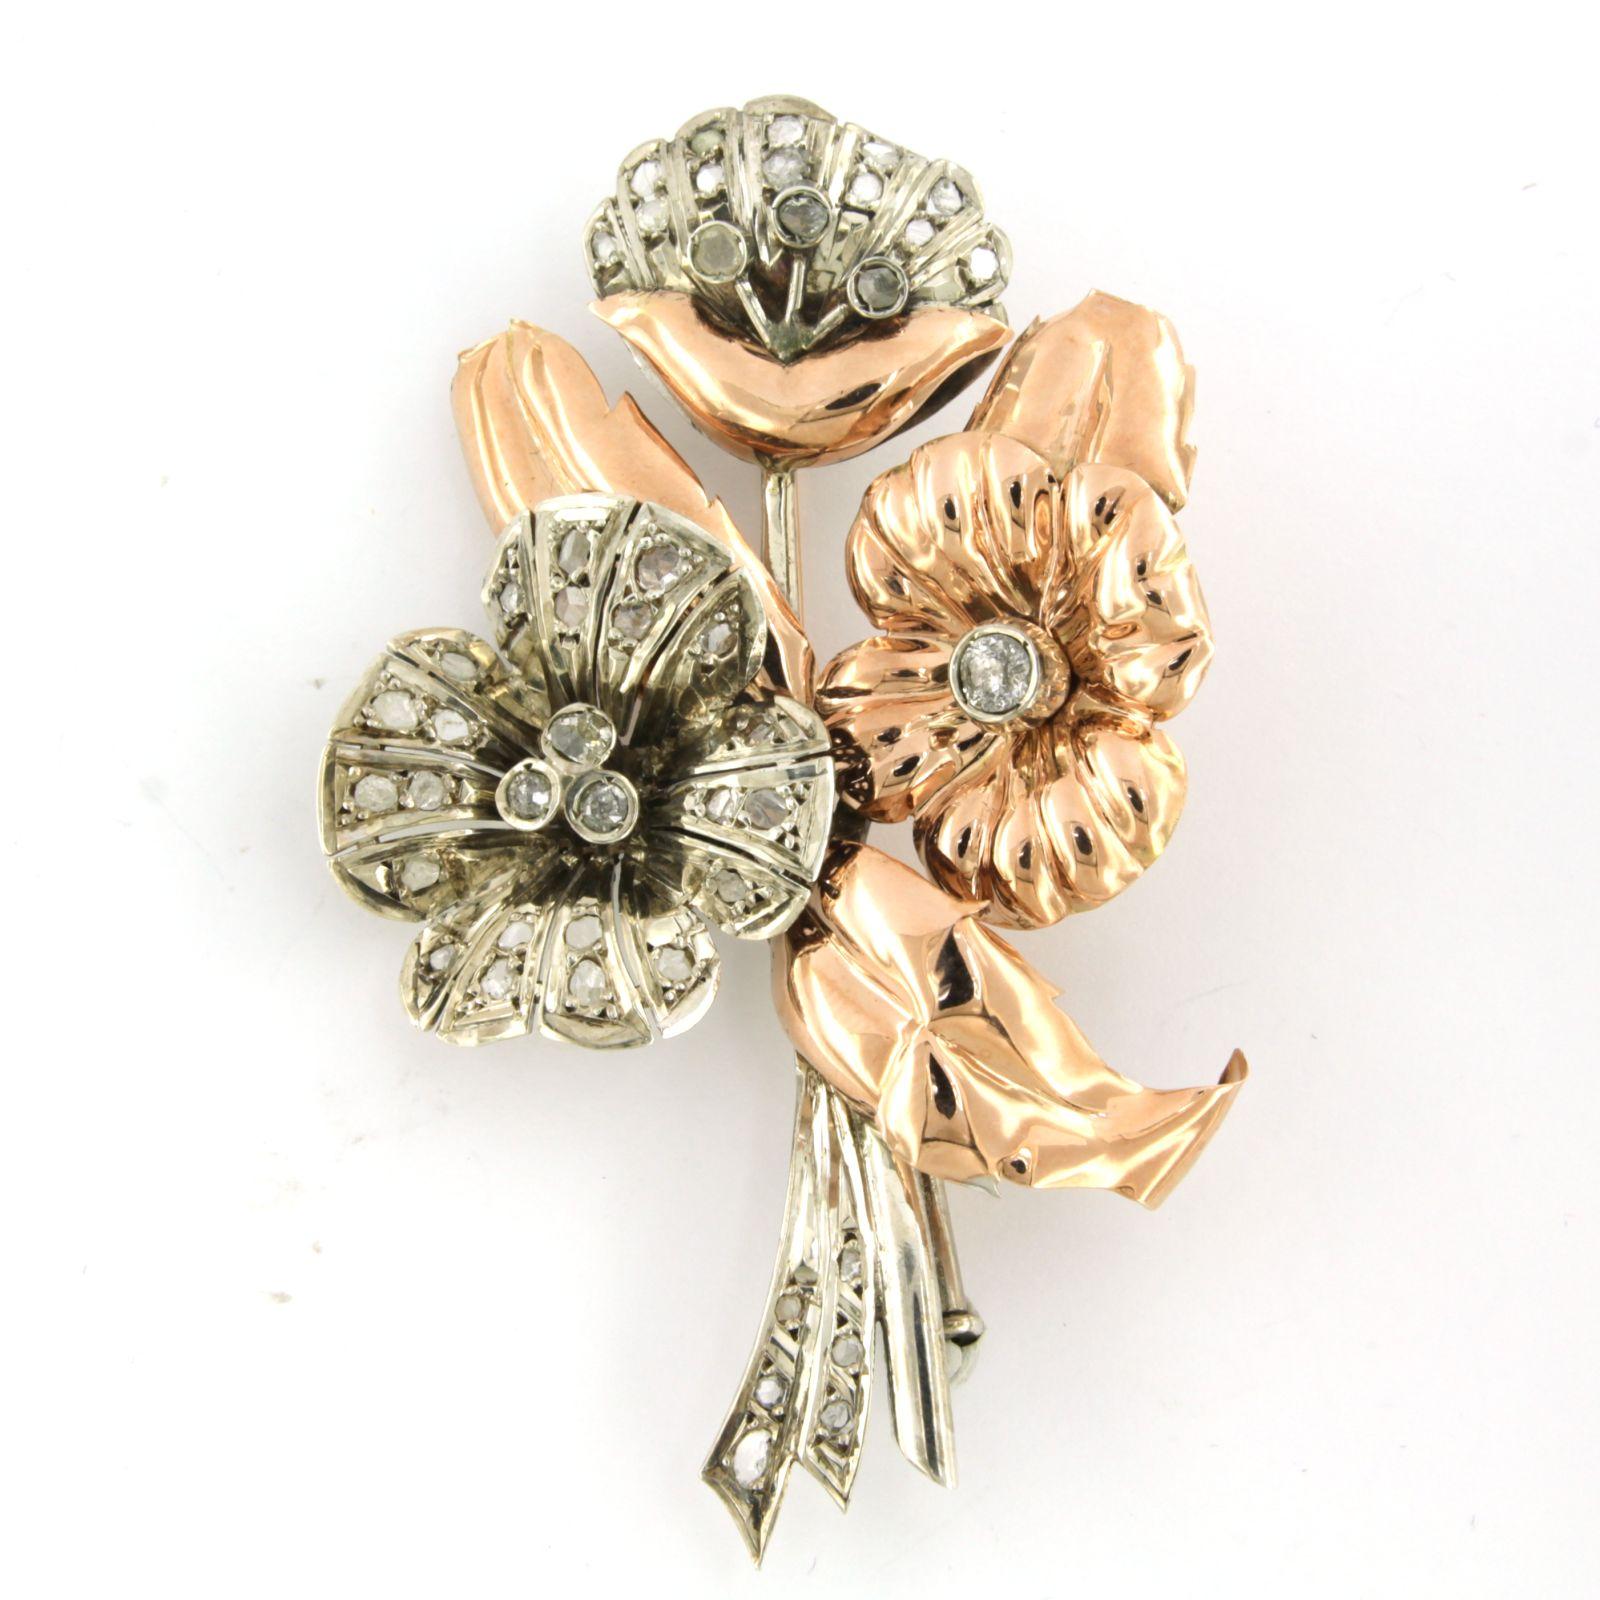 Retro brooch set with rose cut and old mine cut diamonds diamonds up to 1.00ct - G/H - SI/Pique - pink gold and silver - 5 cm x 7.5 cm

Detailed description

The brooch is 5.0 cm wide and 7.5 cm high

weight: 14.5 grams

Gold content below 14k,